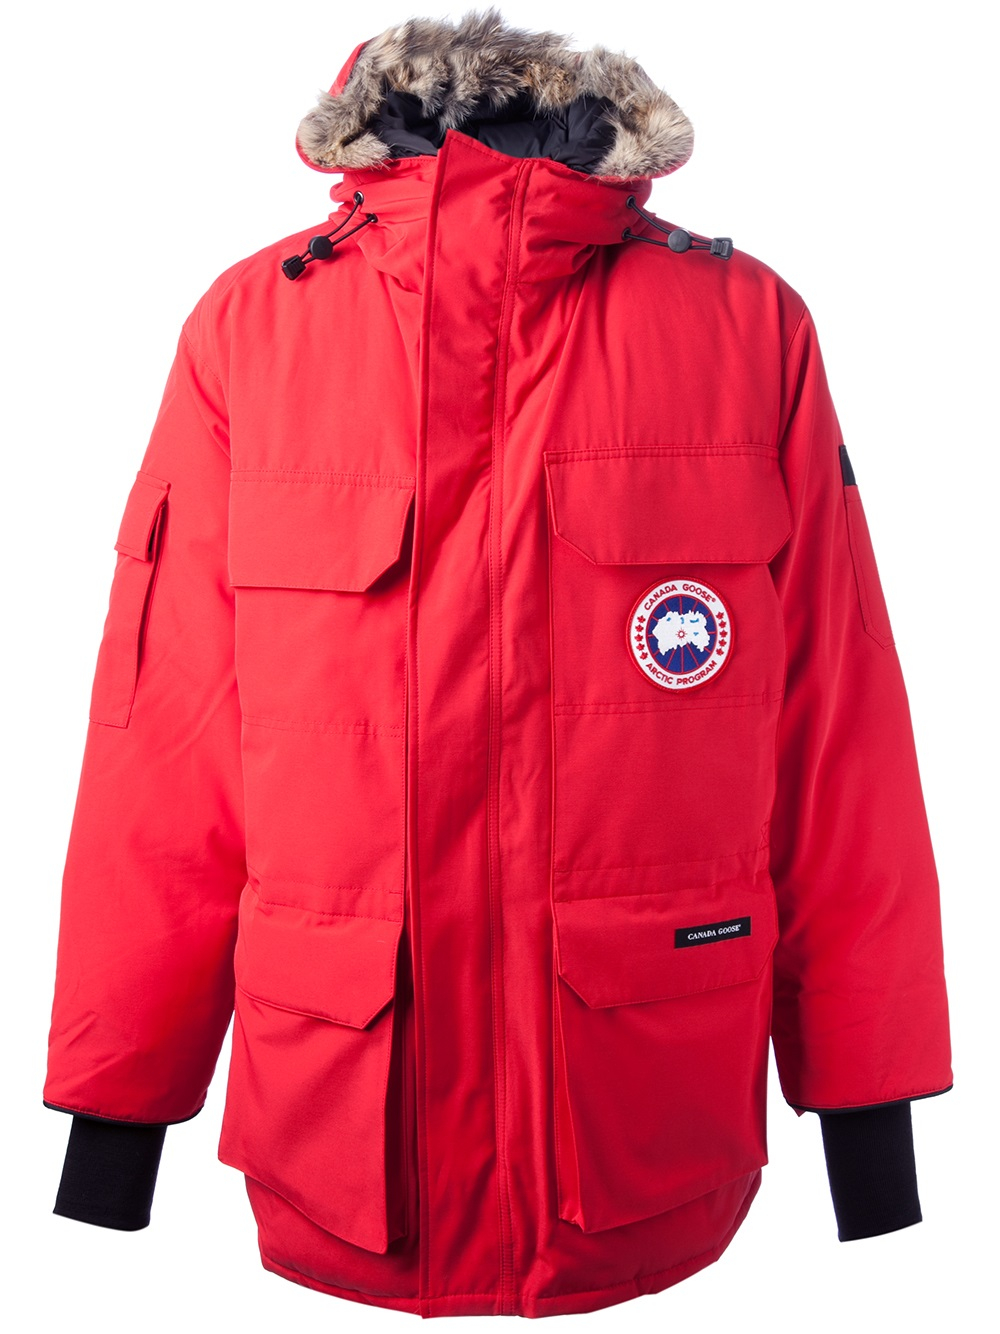 Lyst - Canada Goose 'Expedition' Parka in Red for Men